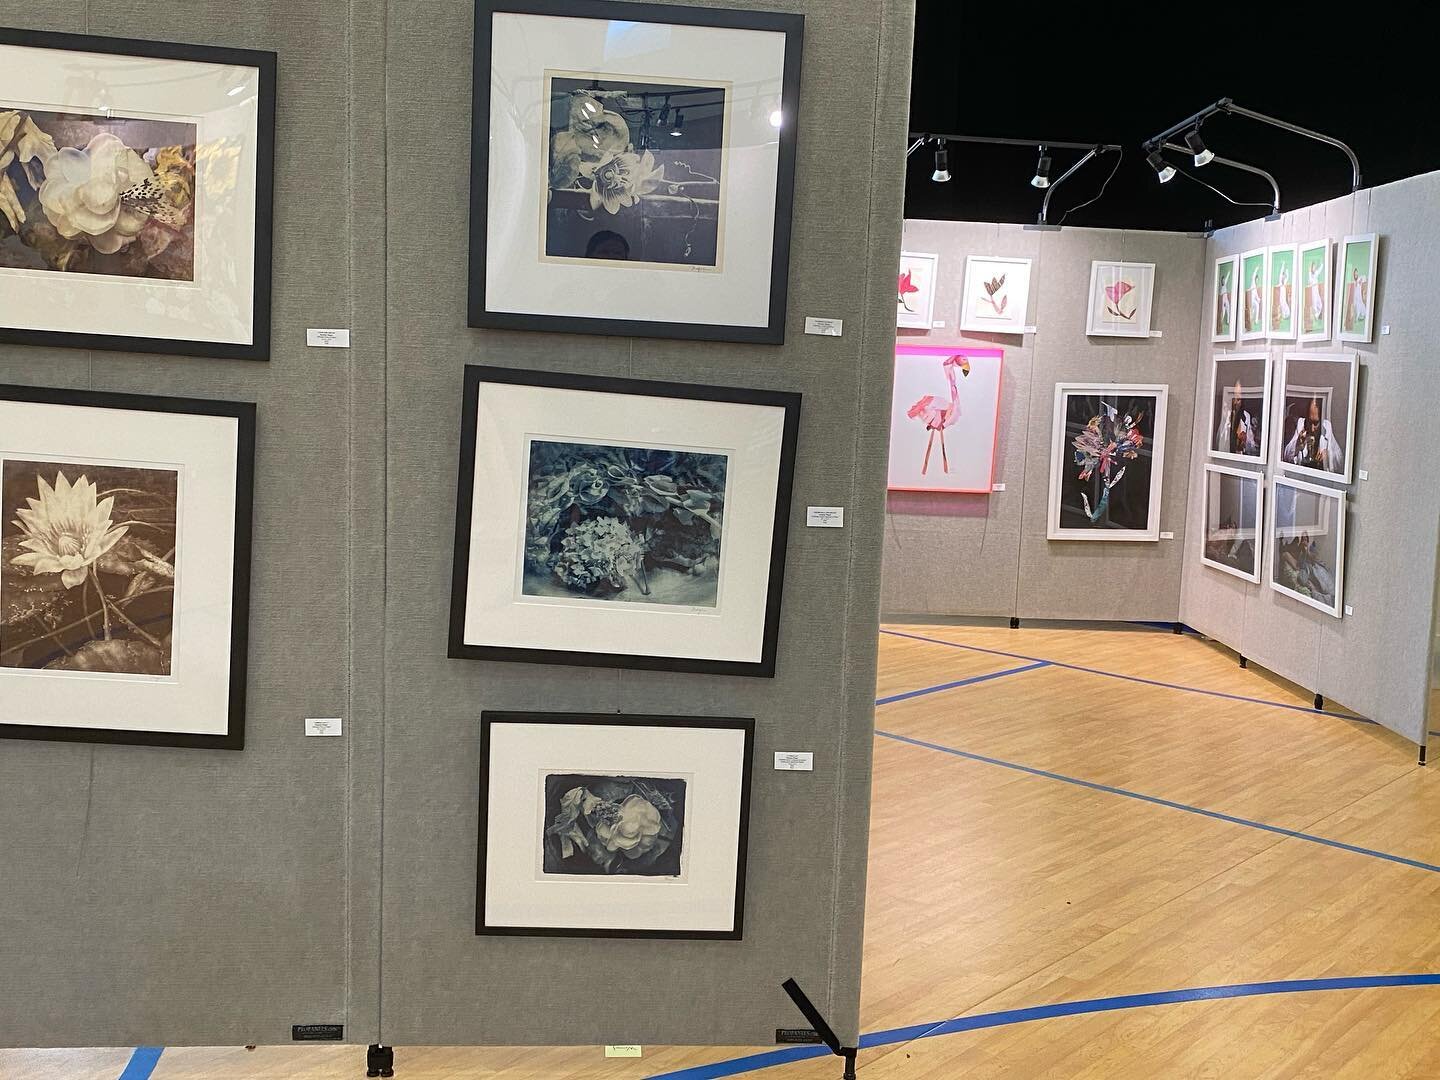 A Vision for Art is slowly taking shape, today is your last day to buy tickets for this amazing event. We have over 400 works of art from 40 artists from around the country. We are so thankful for all the hard work from our committee and volunteers. 